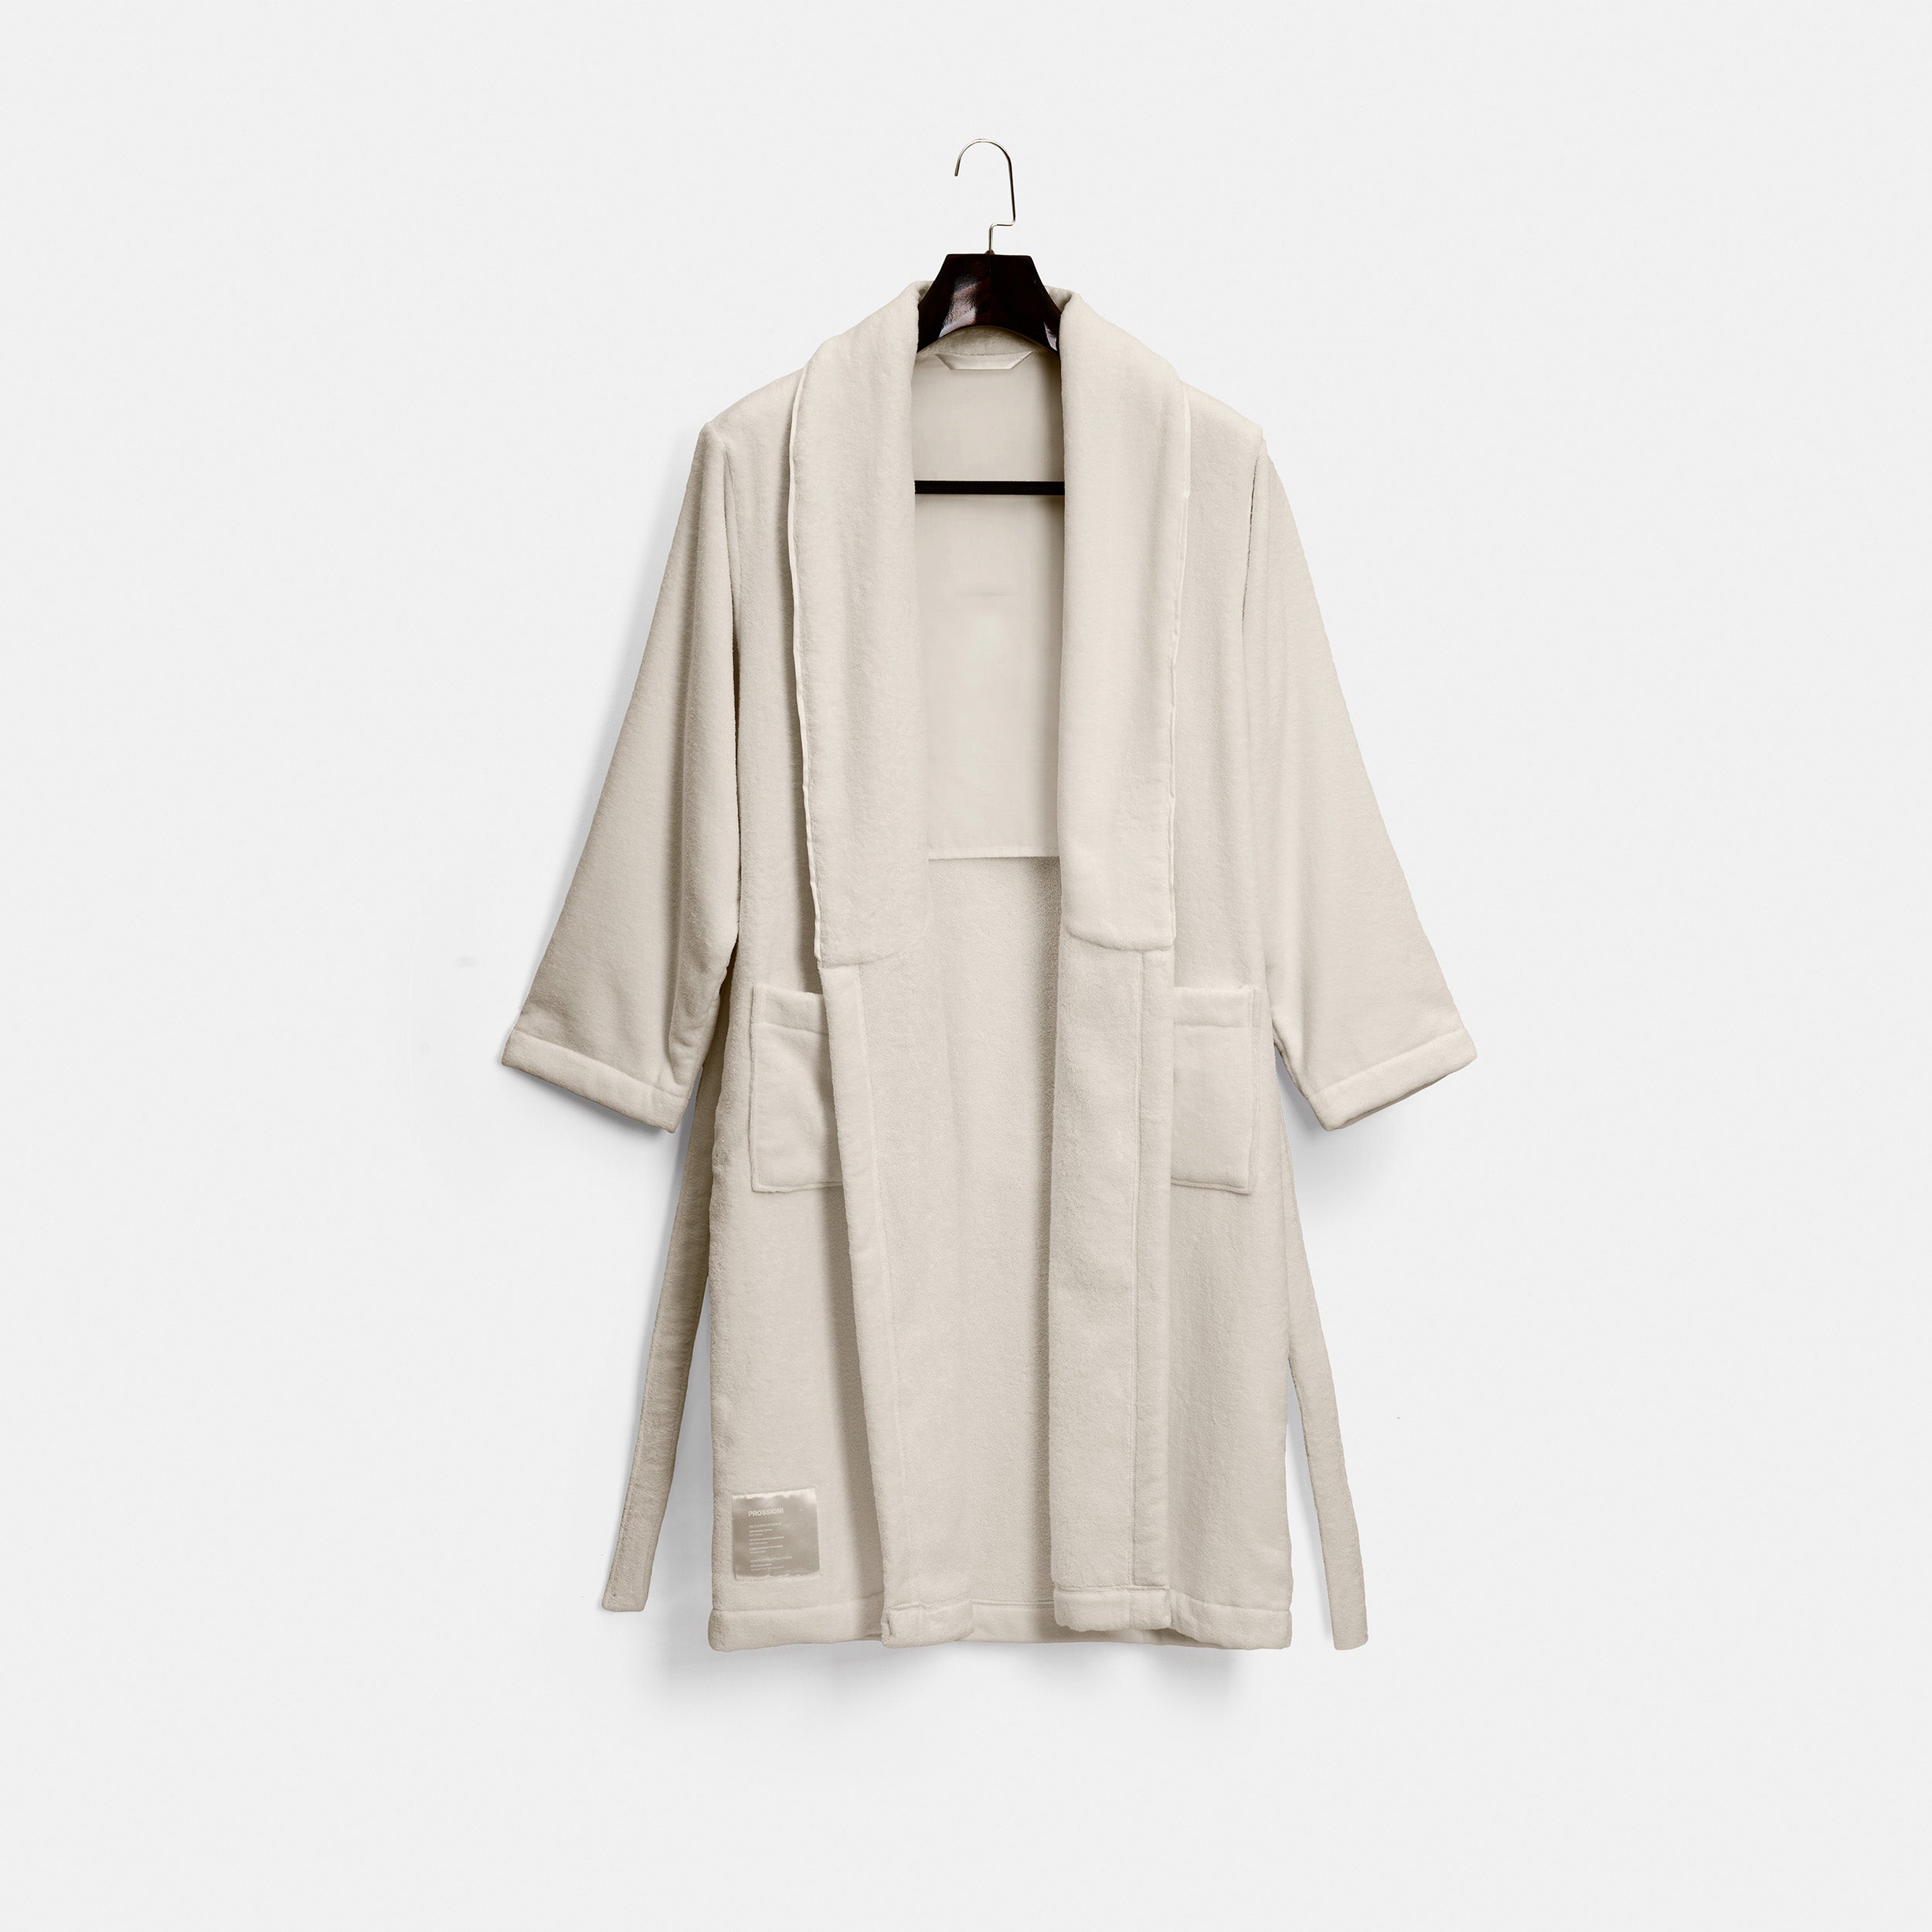 Heritage Robe Terry / X-Small / Moscato Beige, Heritage Robe Terry / Small / Moscato Beige, Heritage Robe Terry / Medium / Moscato Beige, Heritage Robe Terry / Large / Moscato Beige, Heritage Robe Terry / X-Large / Moscato Beige